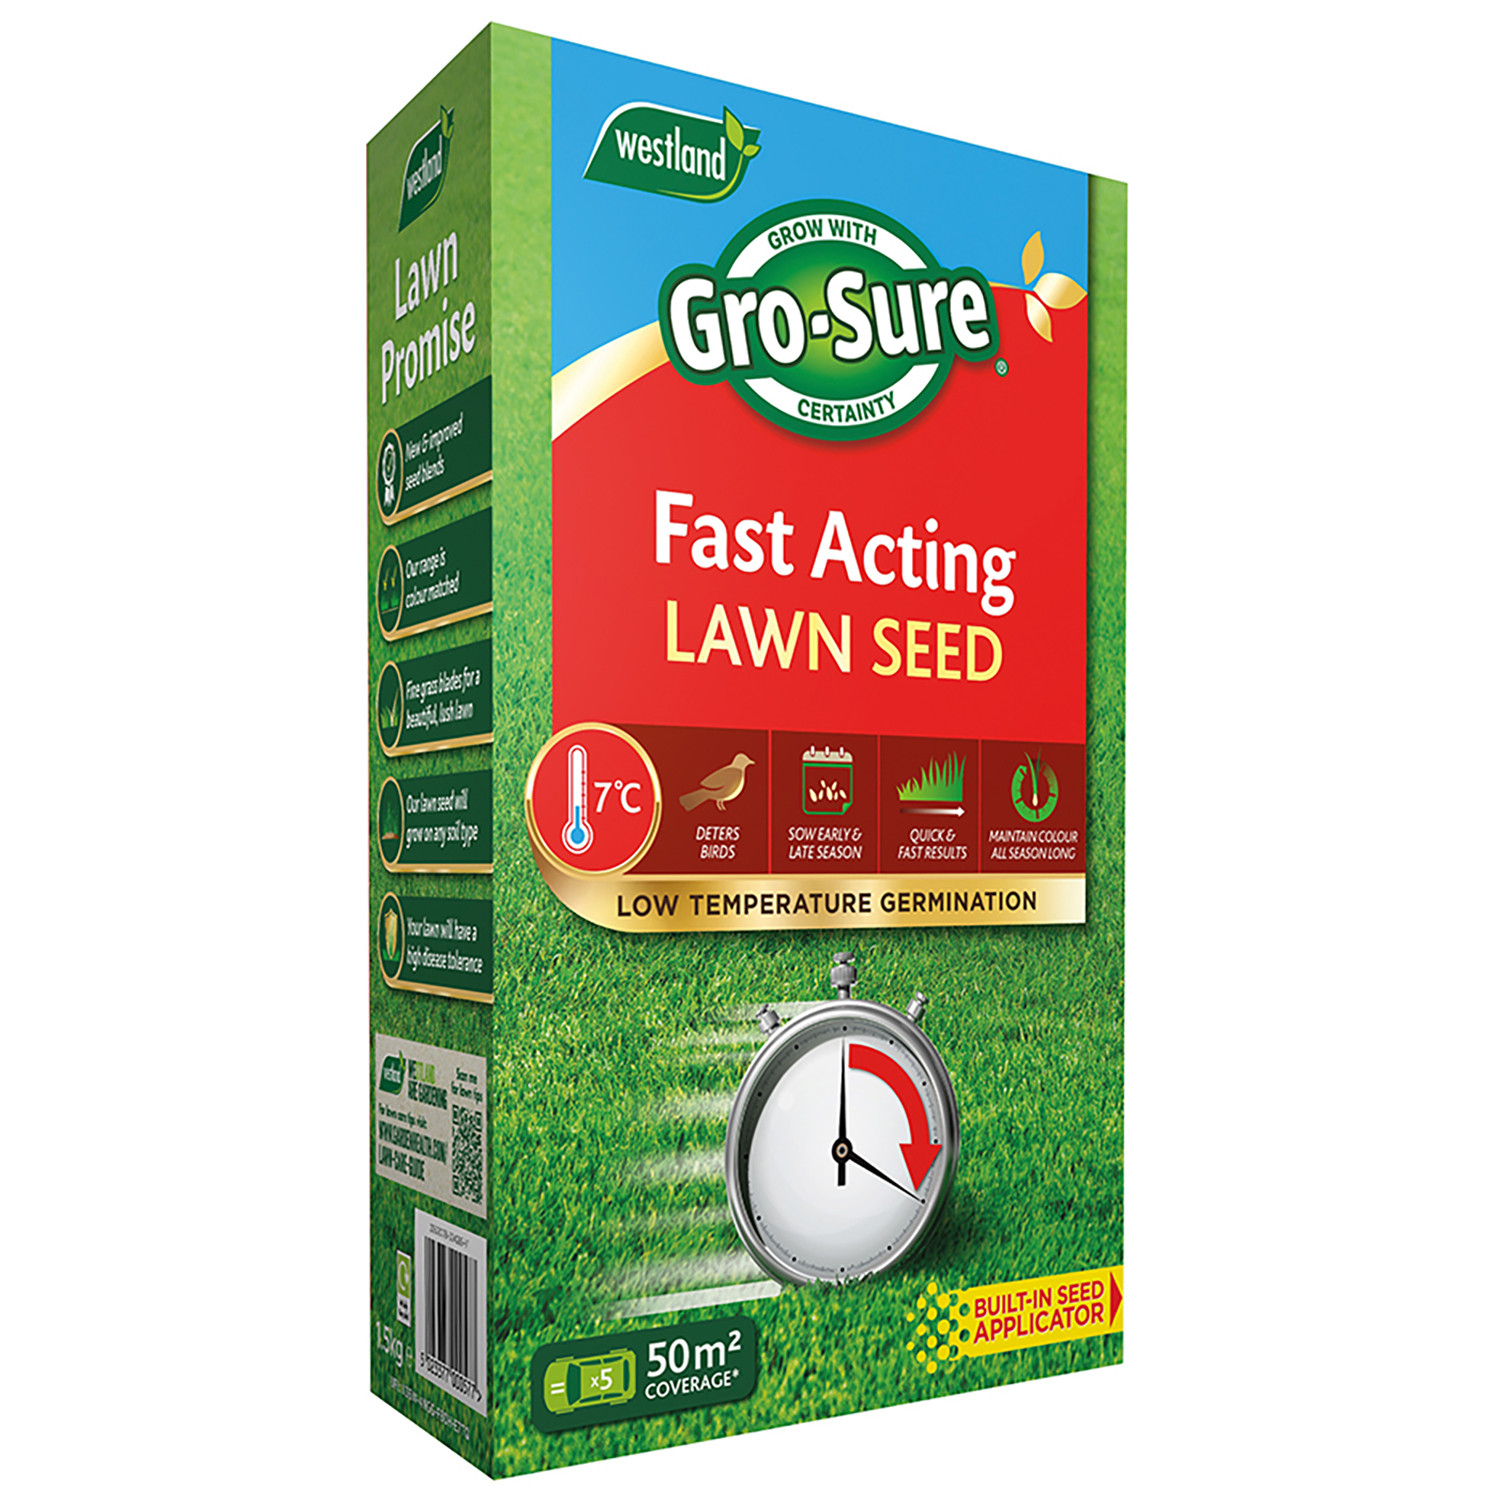 Westland Gro-Sure Fast Acting Lawn Seed Image